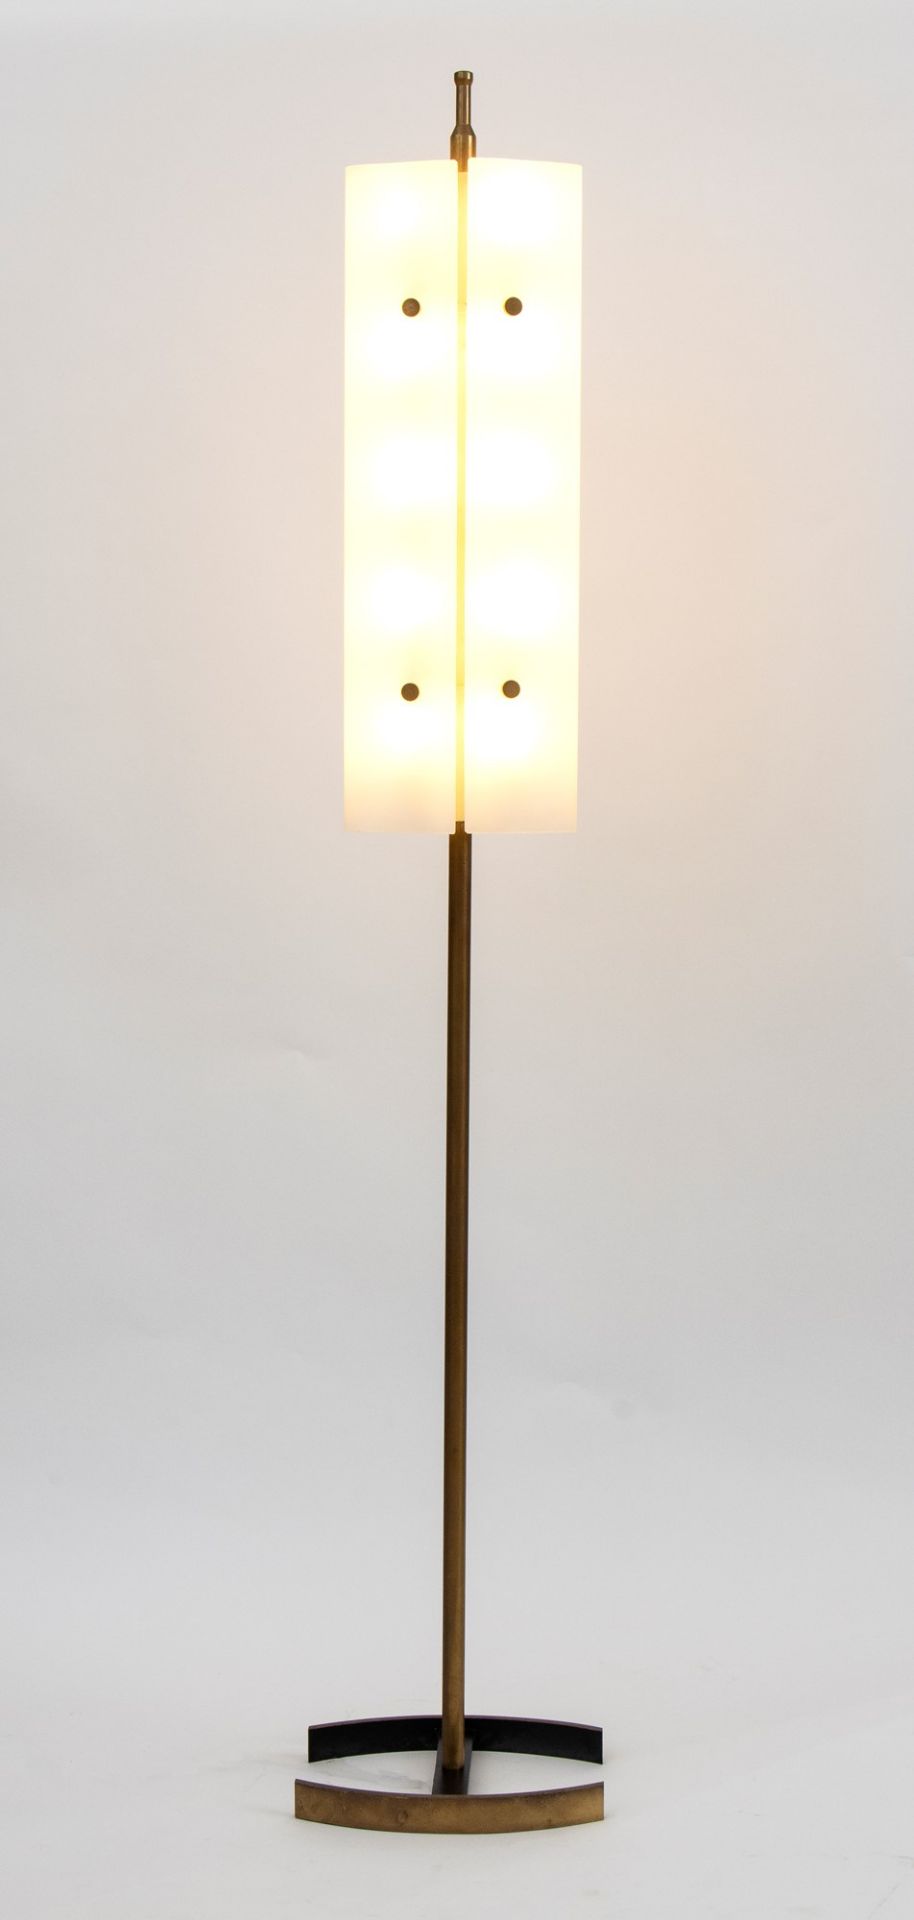 Angelo Lelli Ancona 1915-Monza 1979 Floor lamp mod. 12707 in brass and opal glass diffusers - Bild 4 aus 15